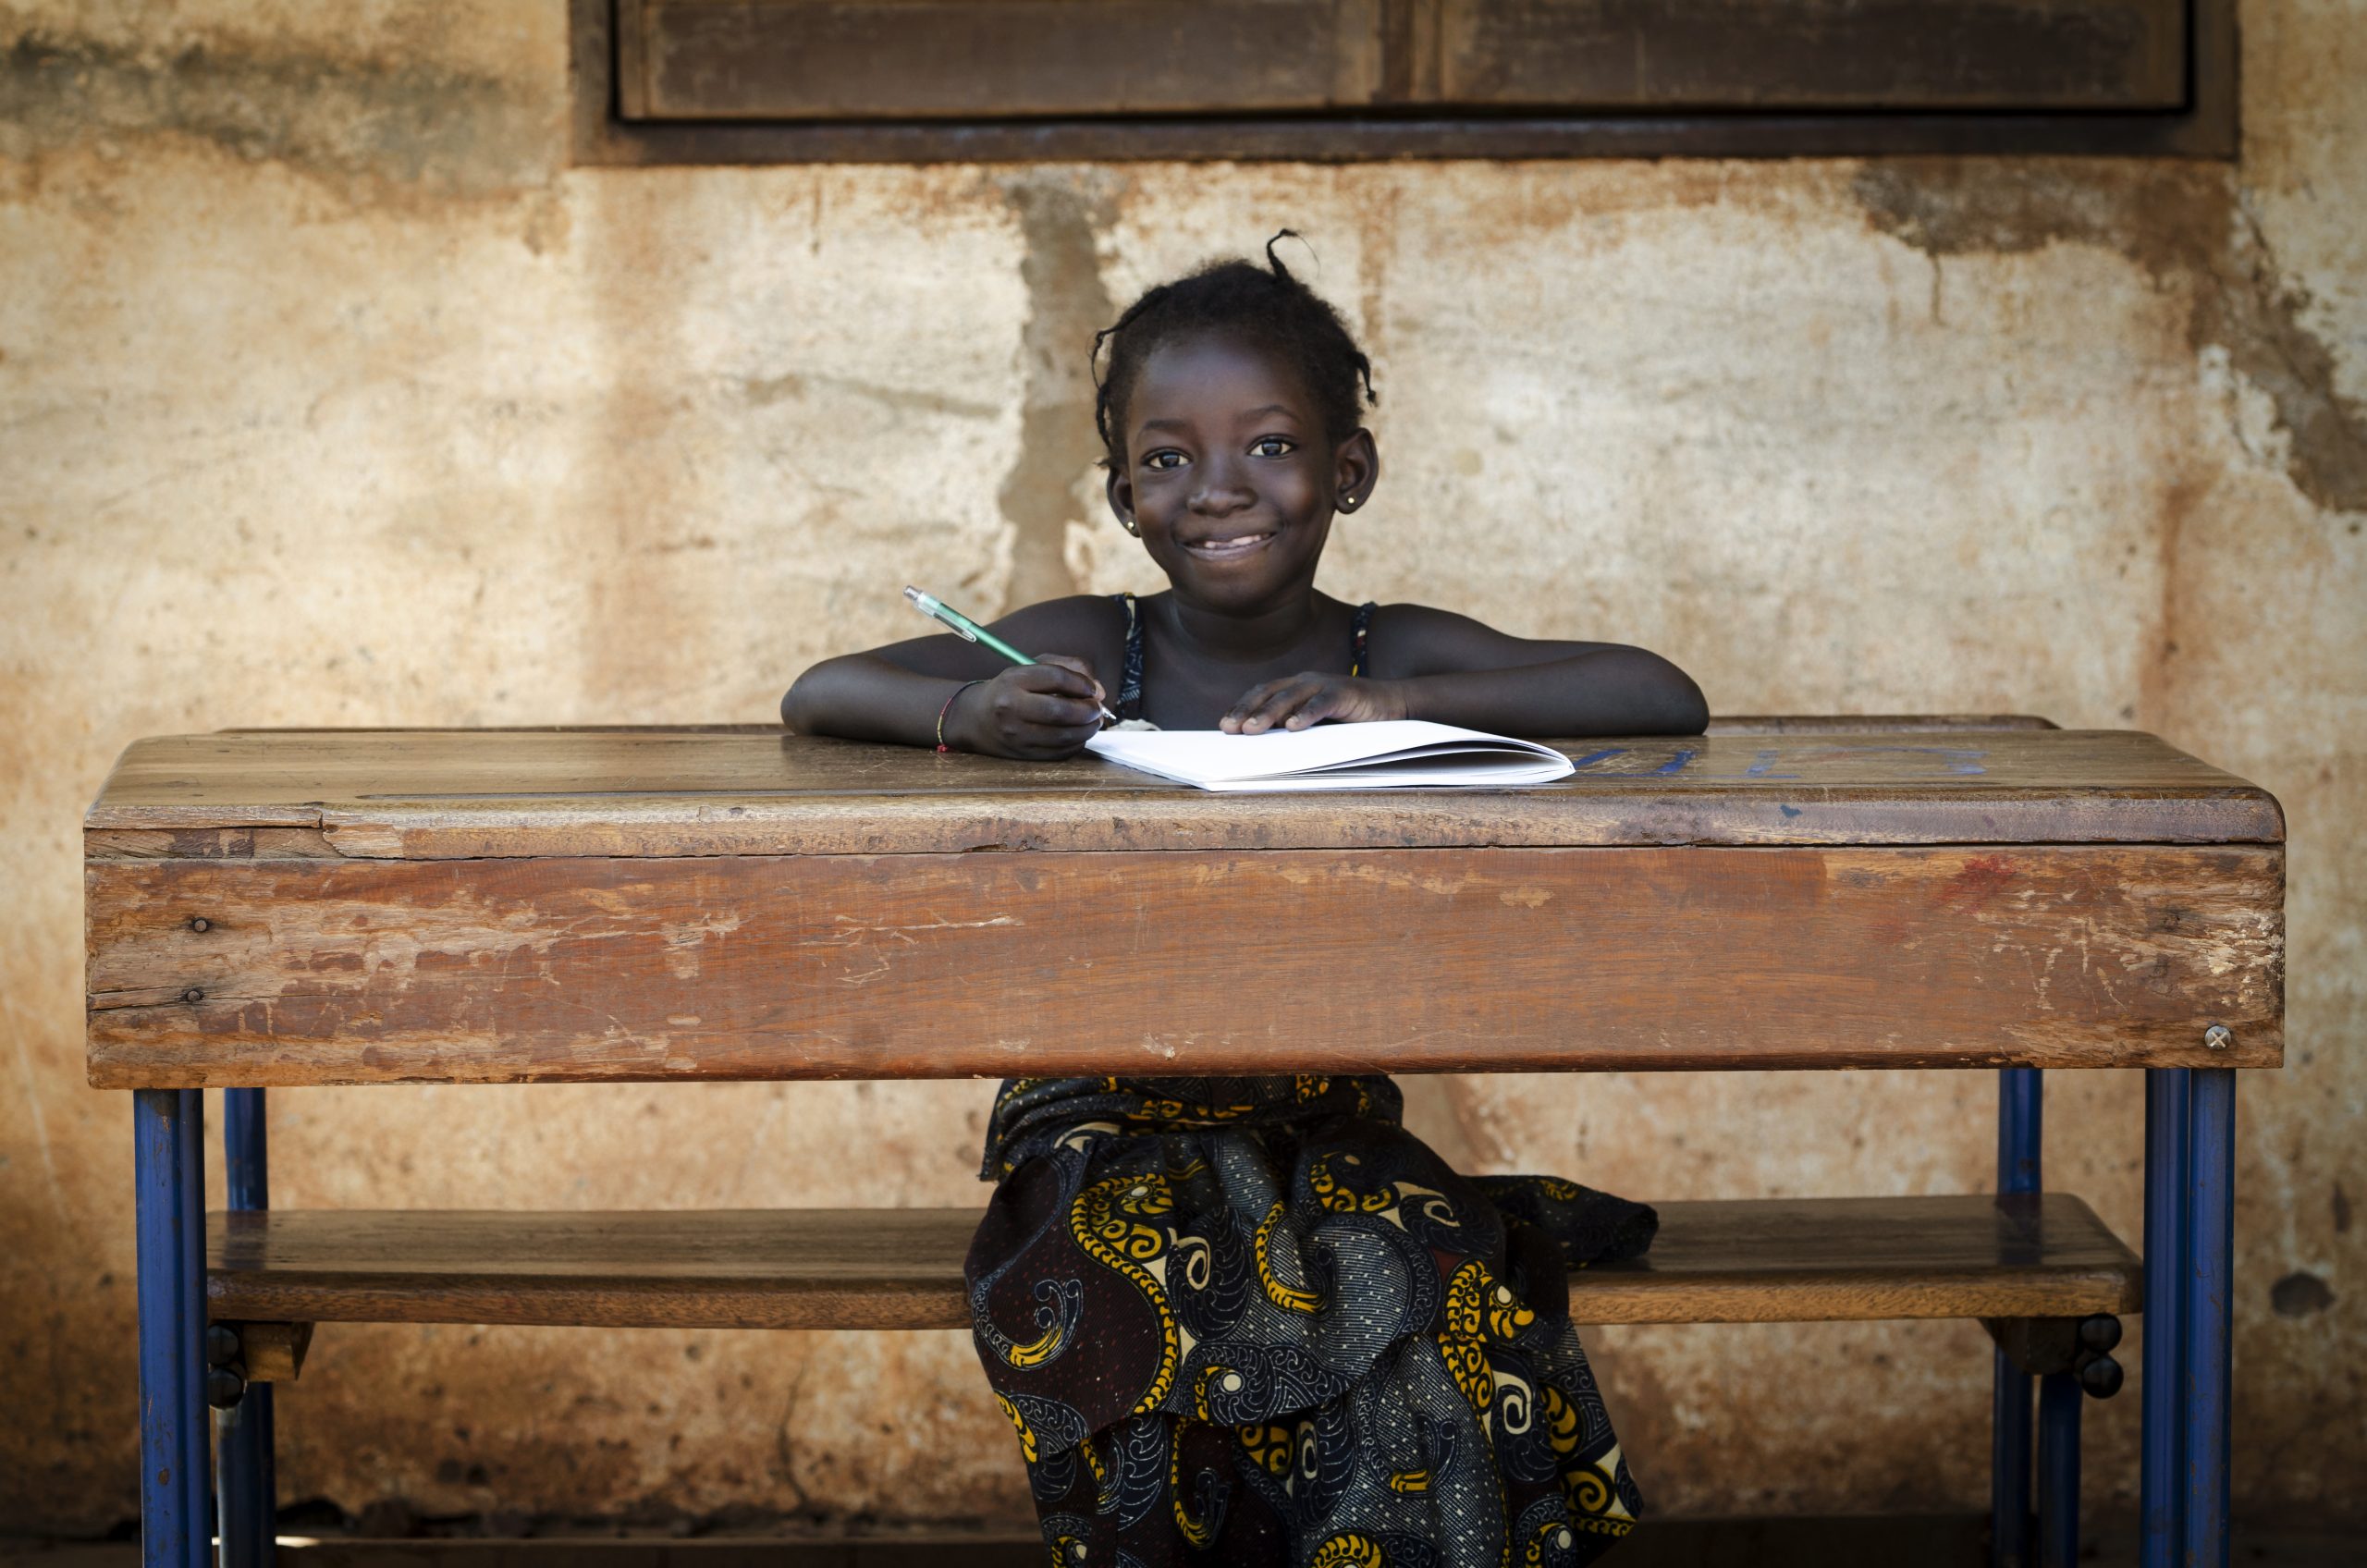 Little super cute African girl sitting in her desk, proudly writing a letter at school in Bamako, Mali.